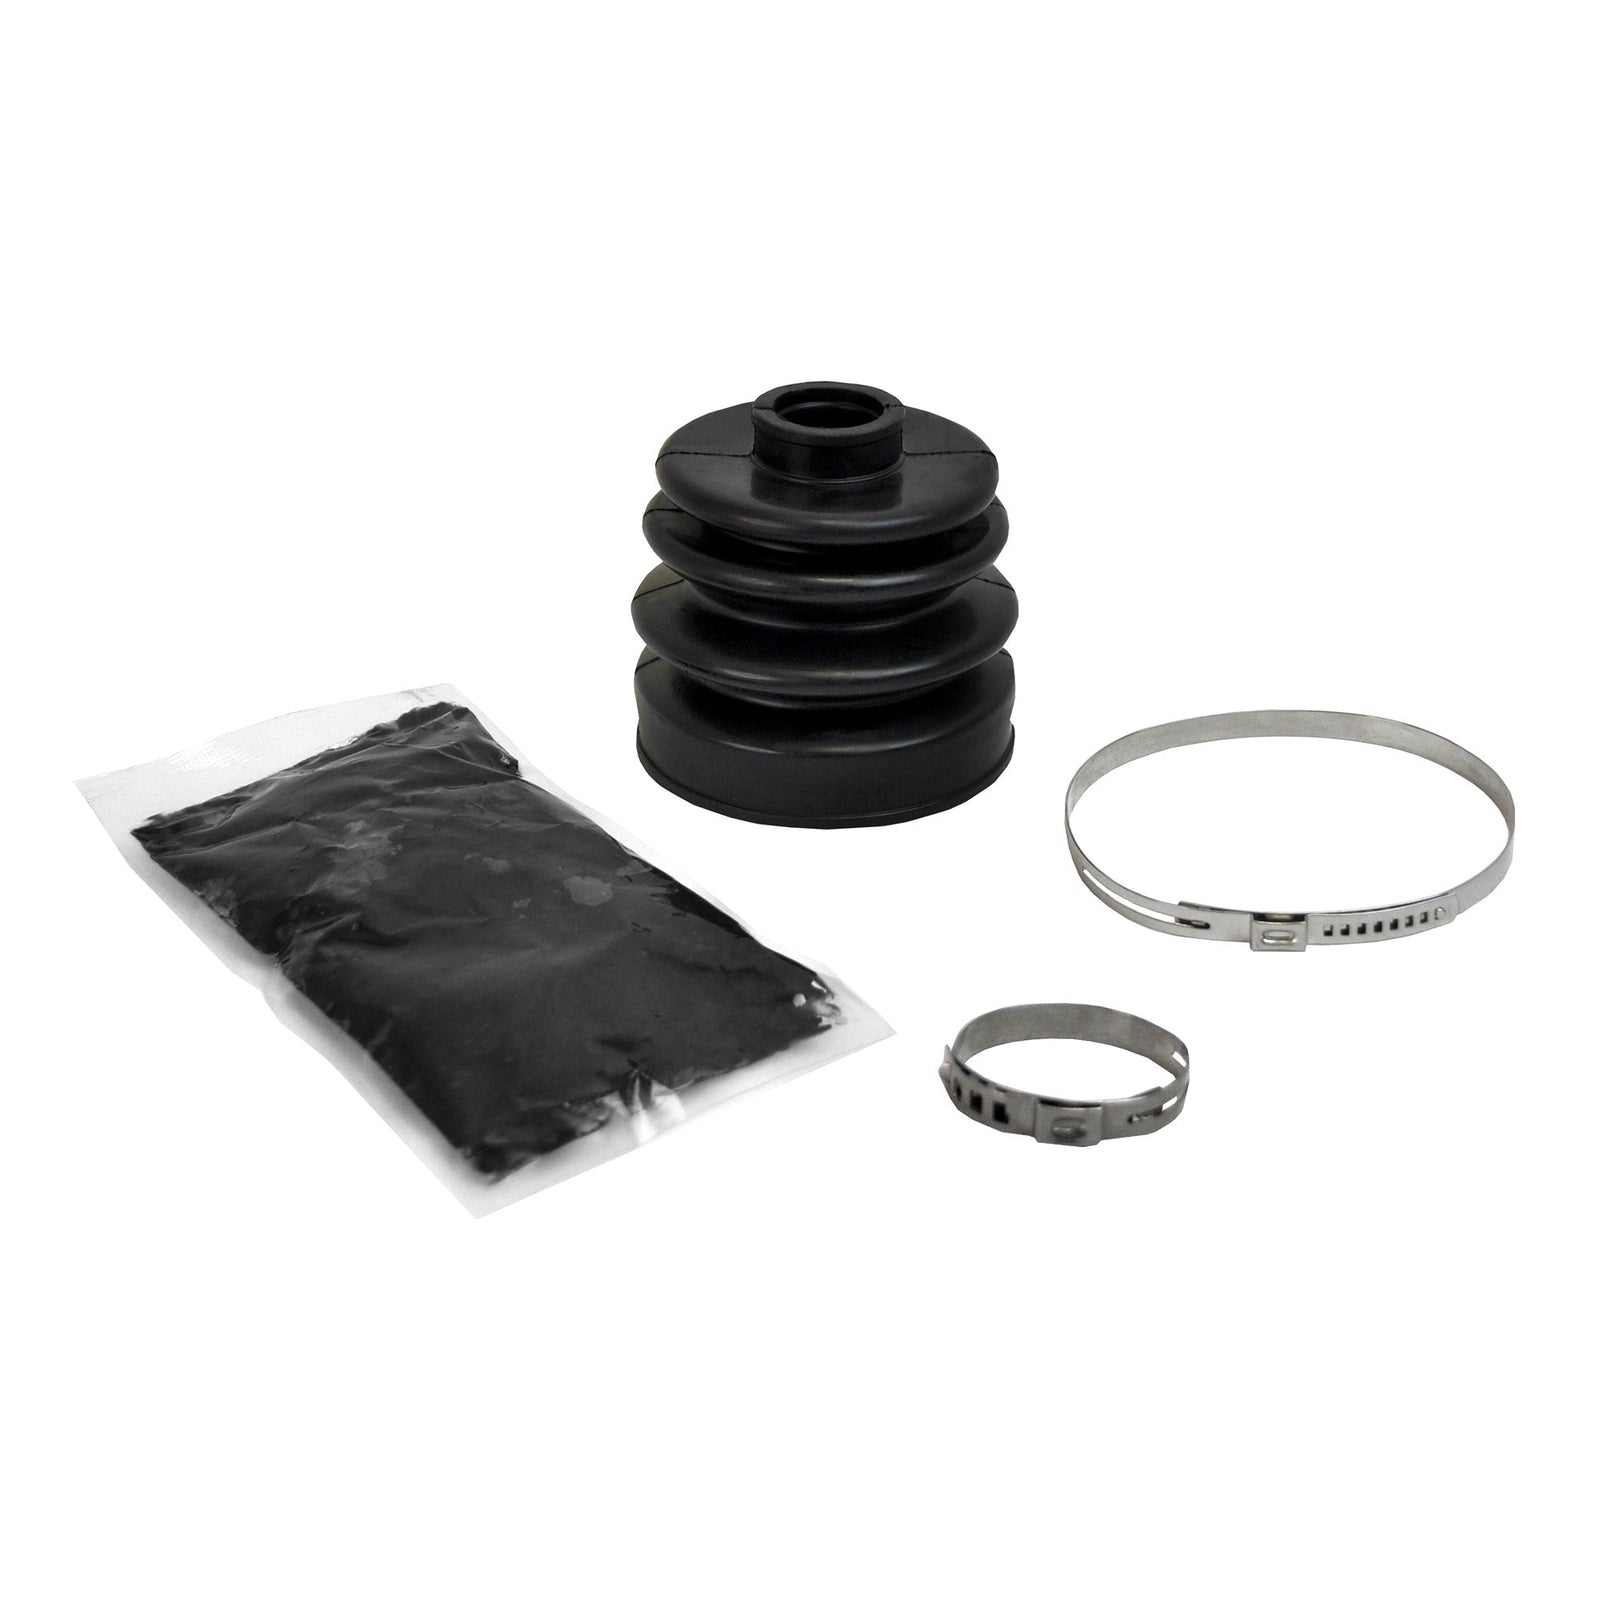 Yamaha Grizzly 700 Rugged OE Replacement Boot Kit